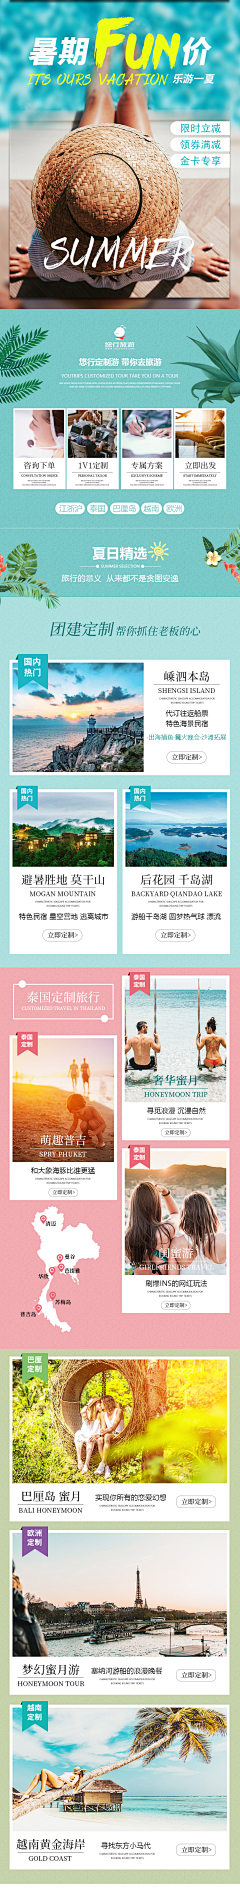 everythingnothing采集到旅游长图